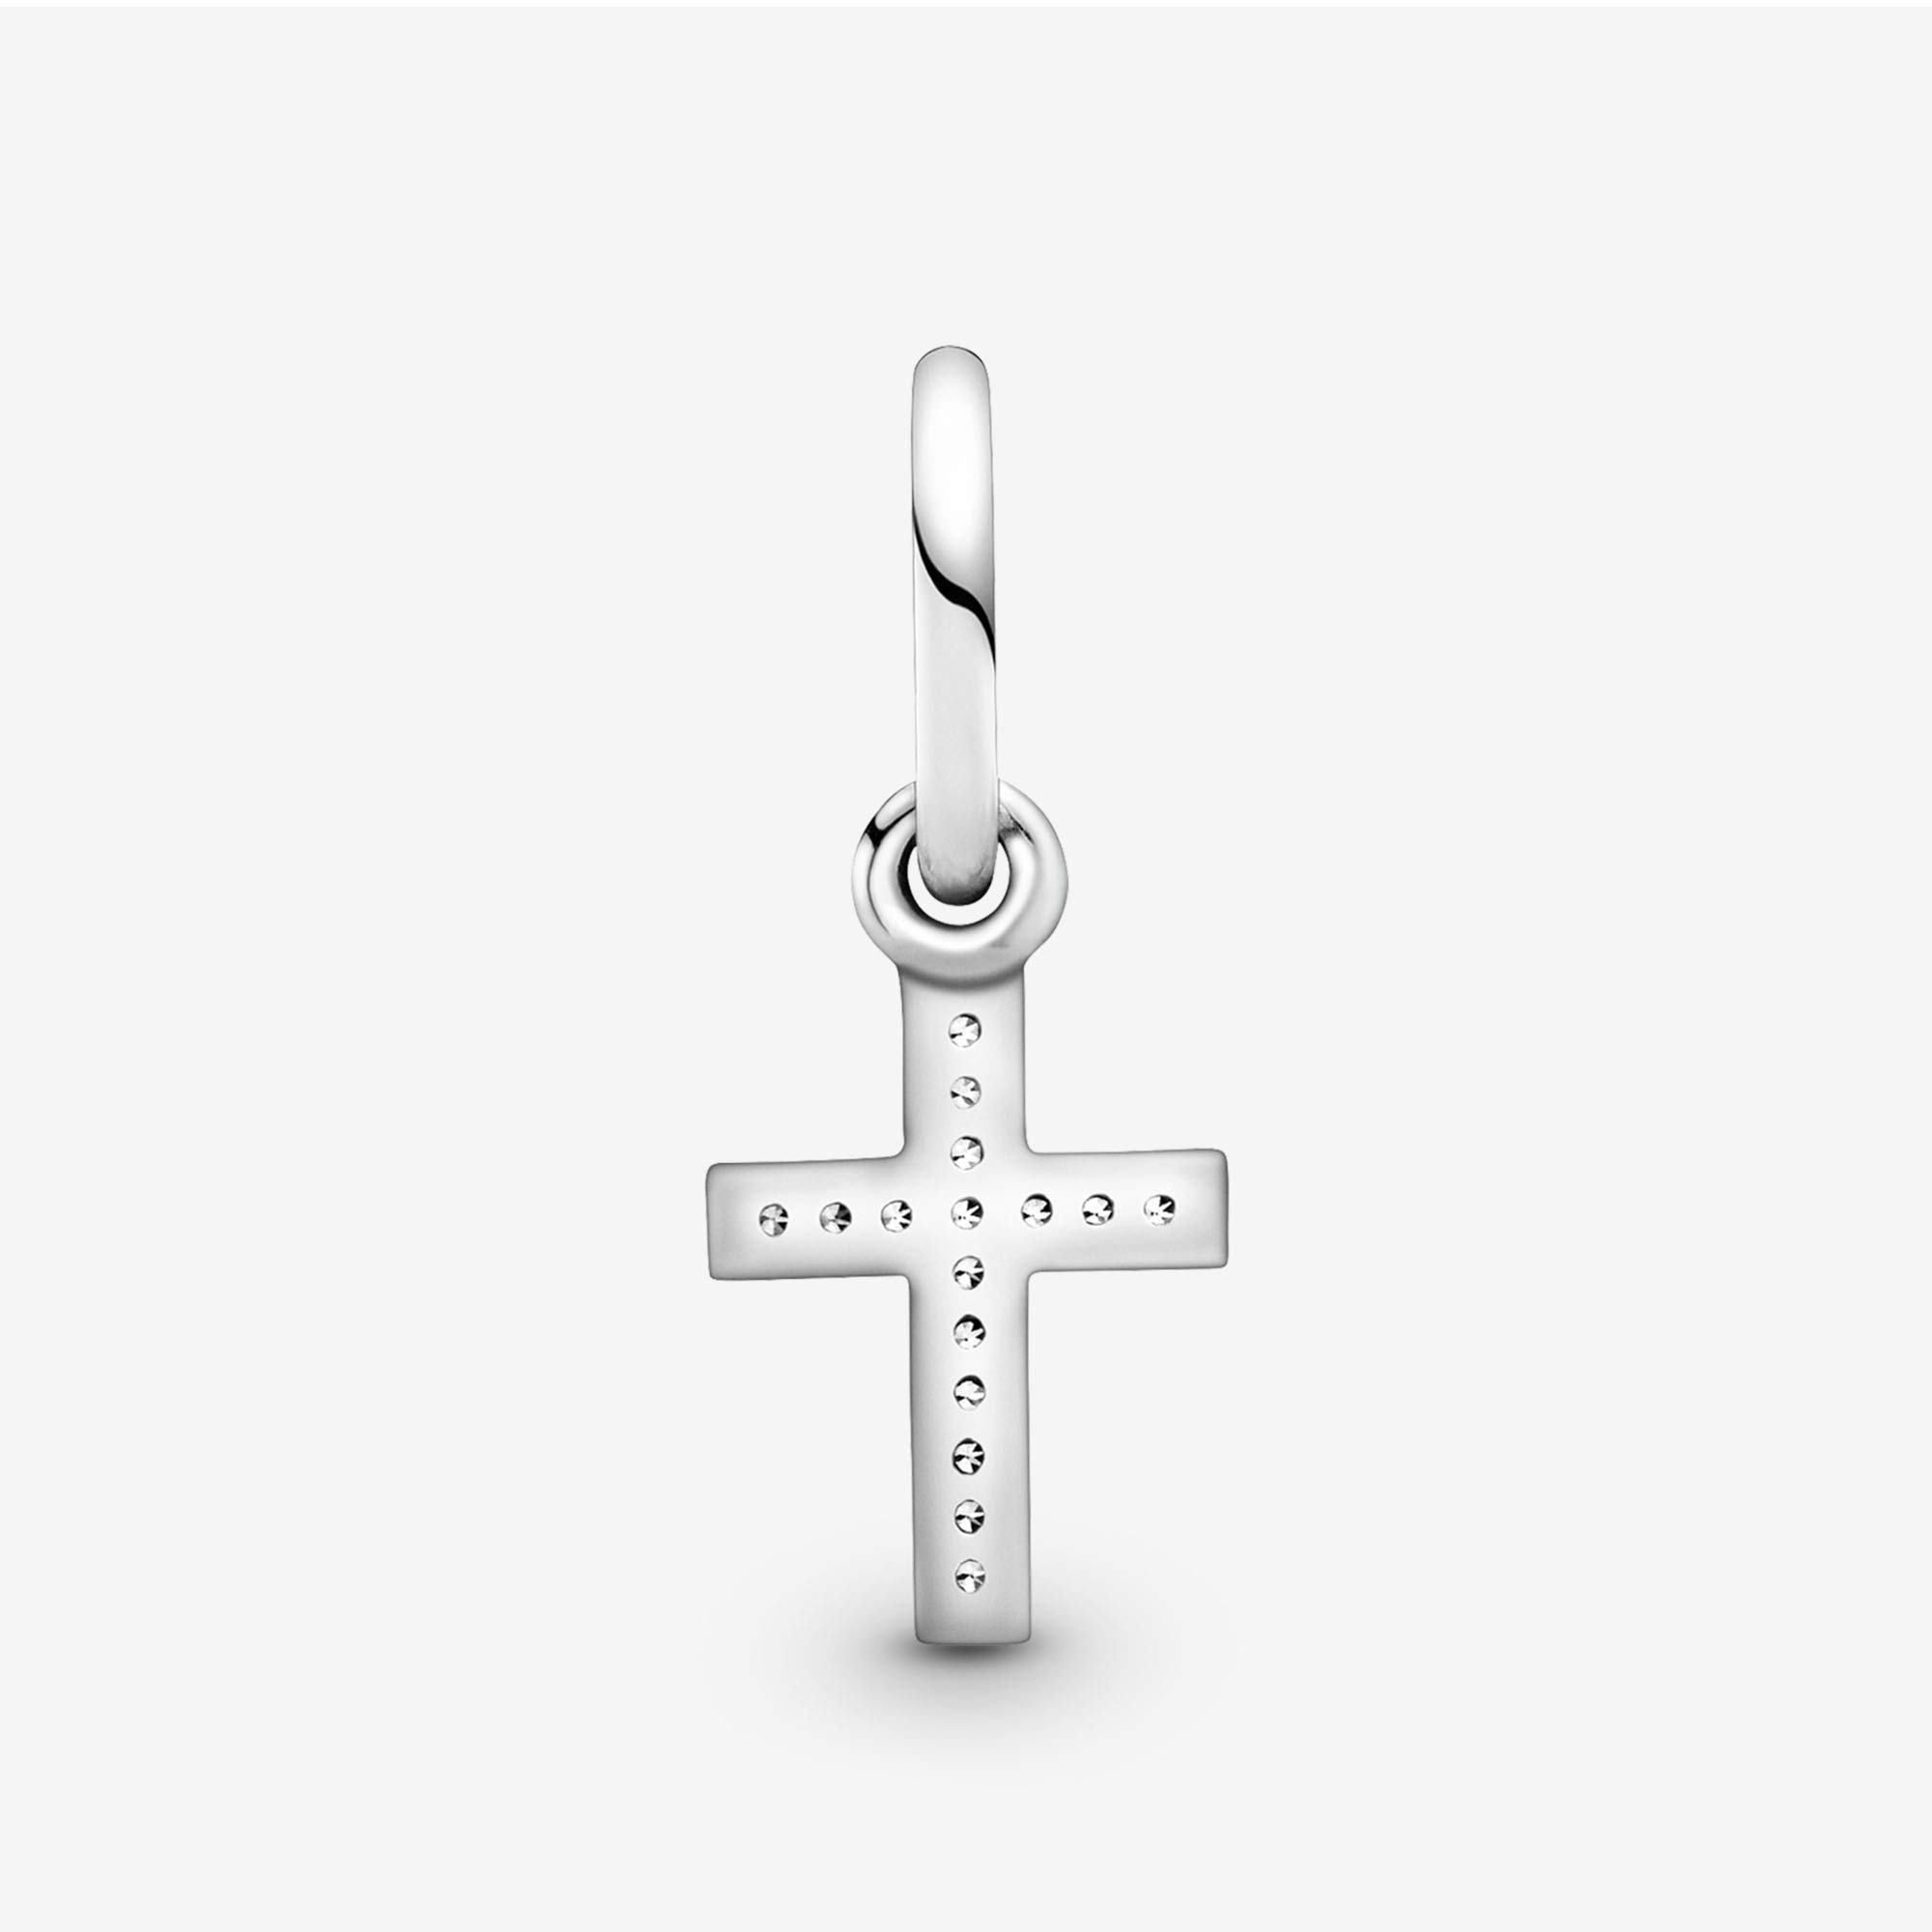 PANDORA Jewelry Sparkling Cross Dangle Cubic Zirconia Charm in Sterling Silver, With Gift Box